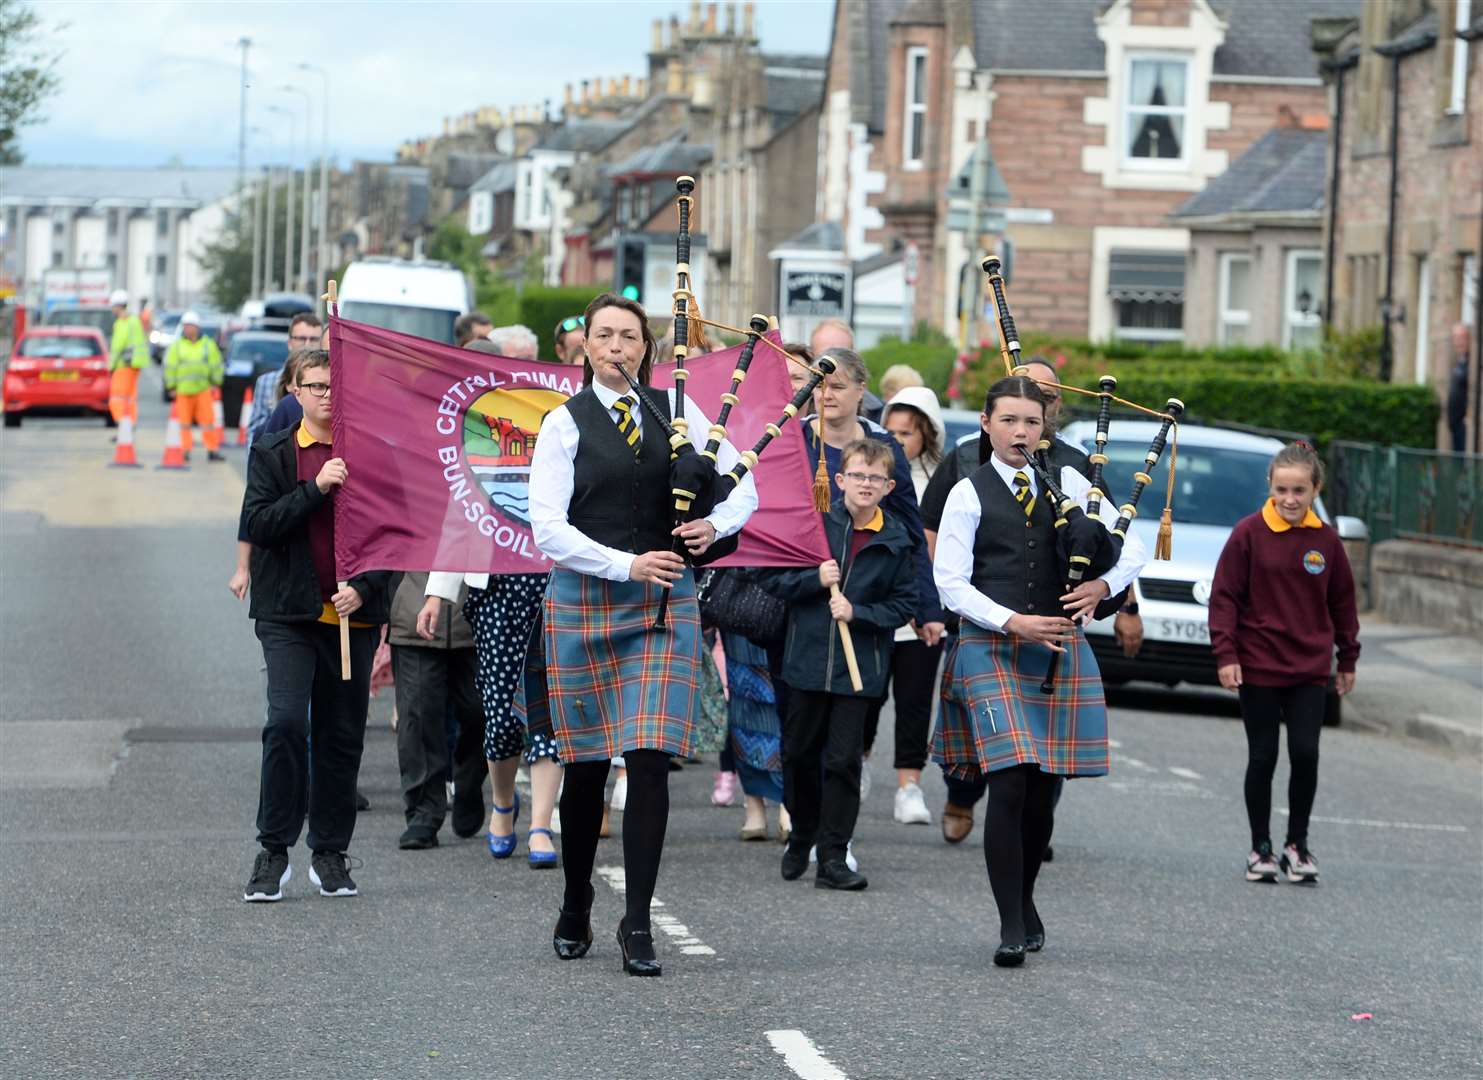 Past and present pupils of Central Primary School in Inverness took part in a procession to mark its 200th anniversary. Pictures: Gary Anthony.